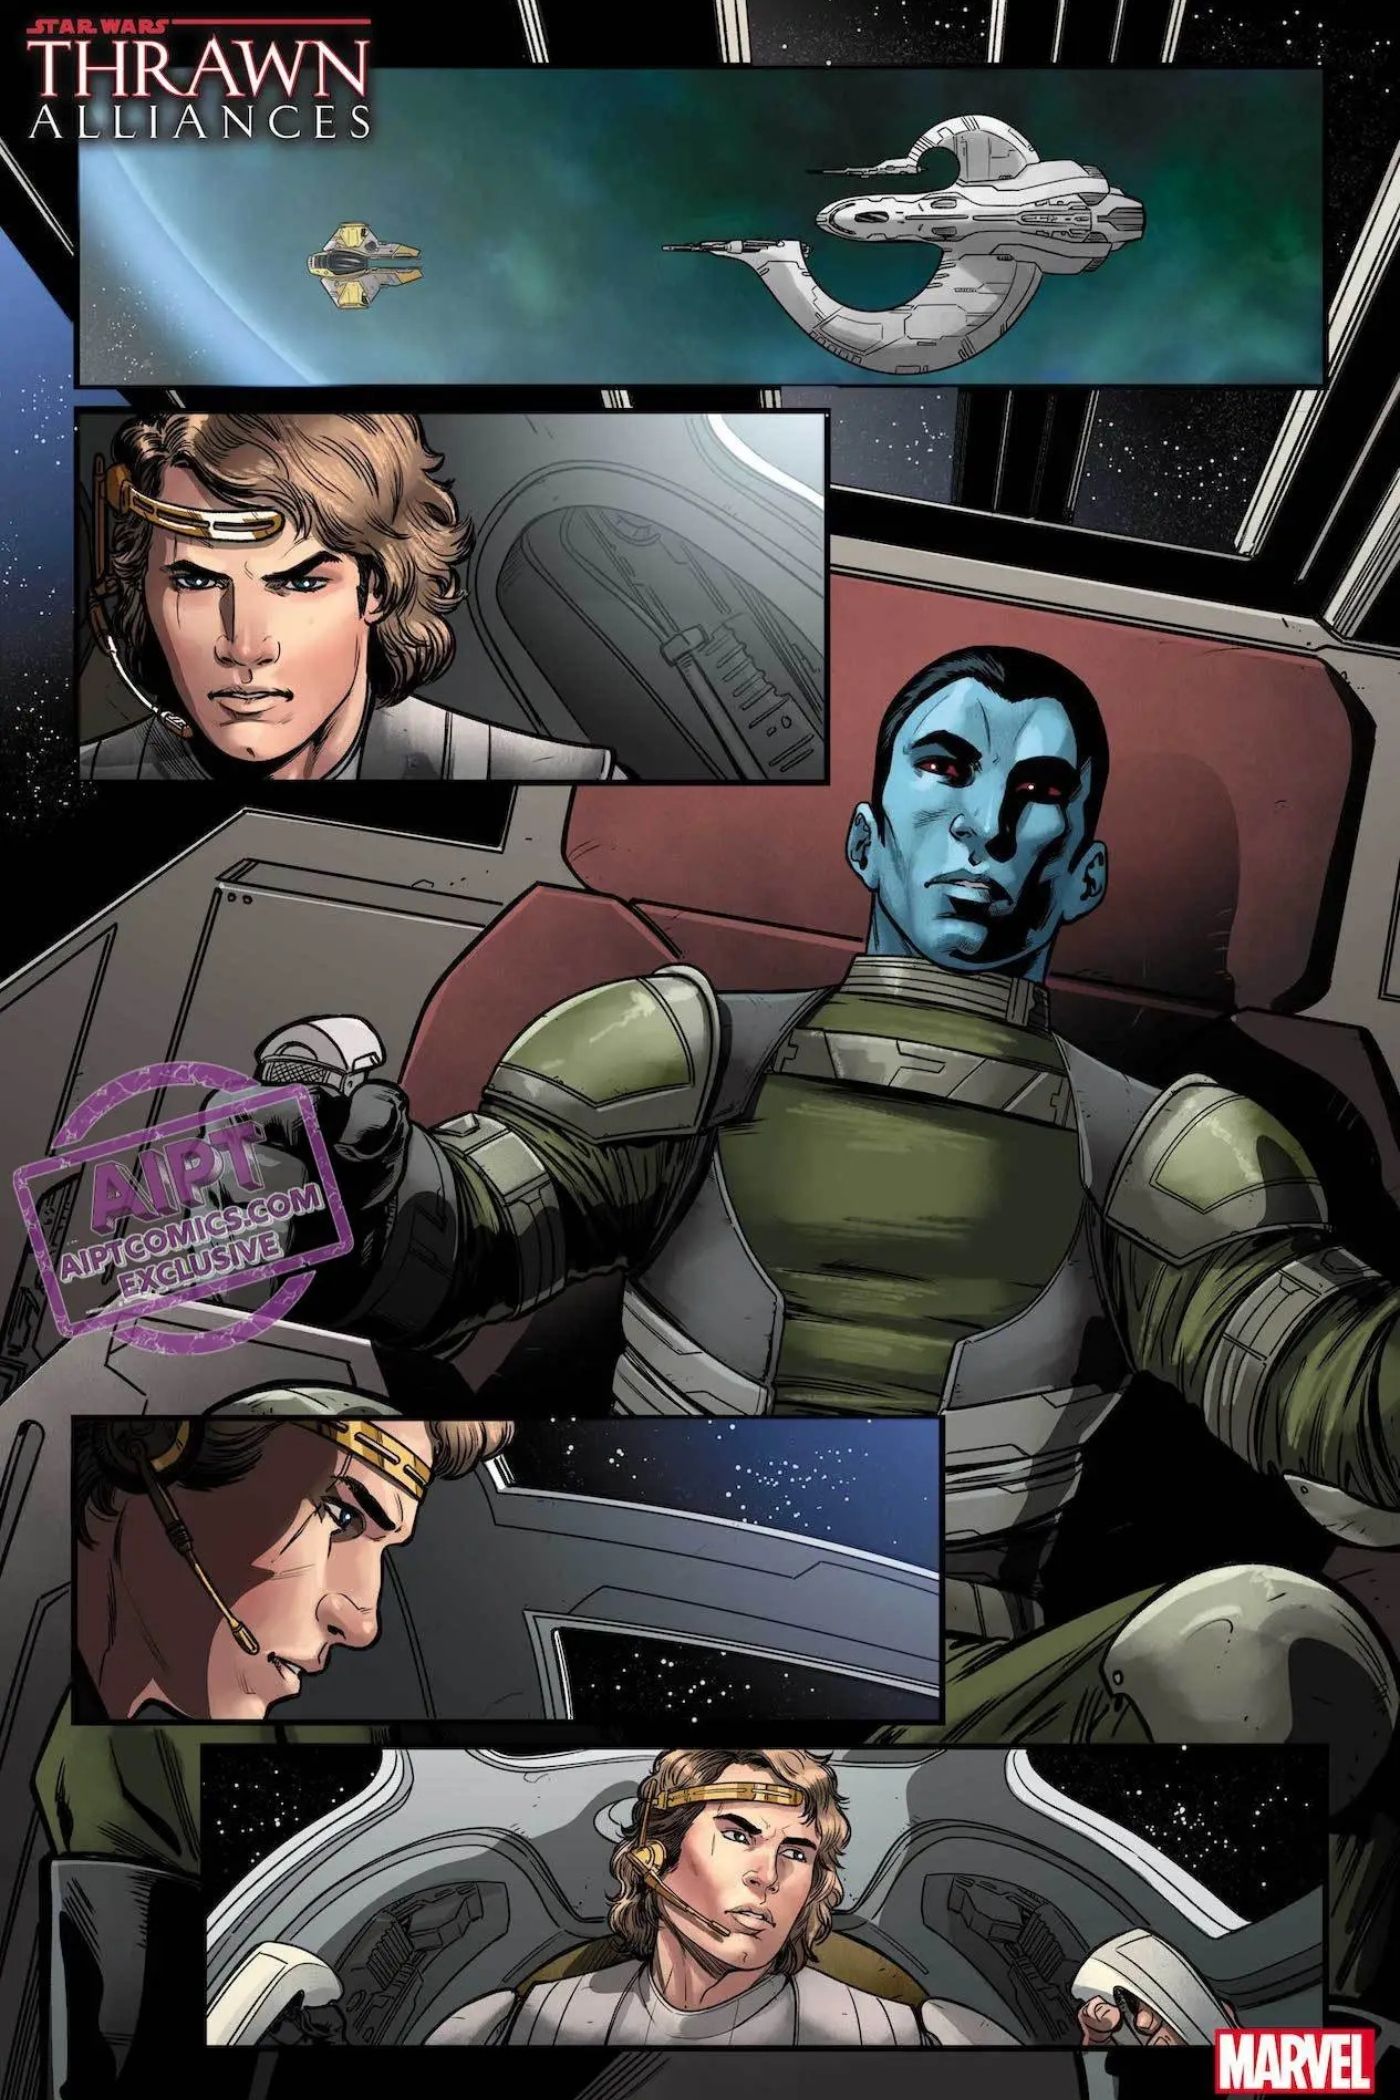 Star Wars: Thrawn Alliances #1 Preview page 4. 